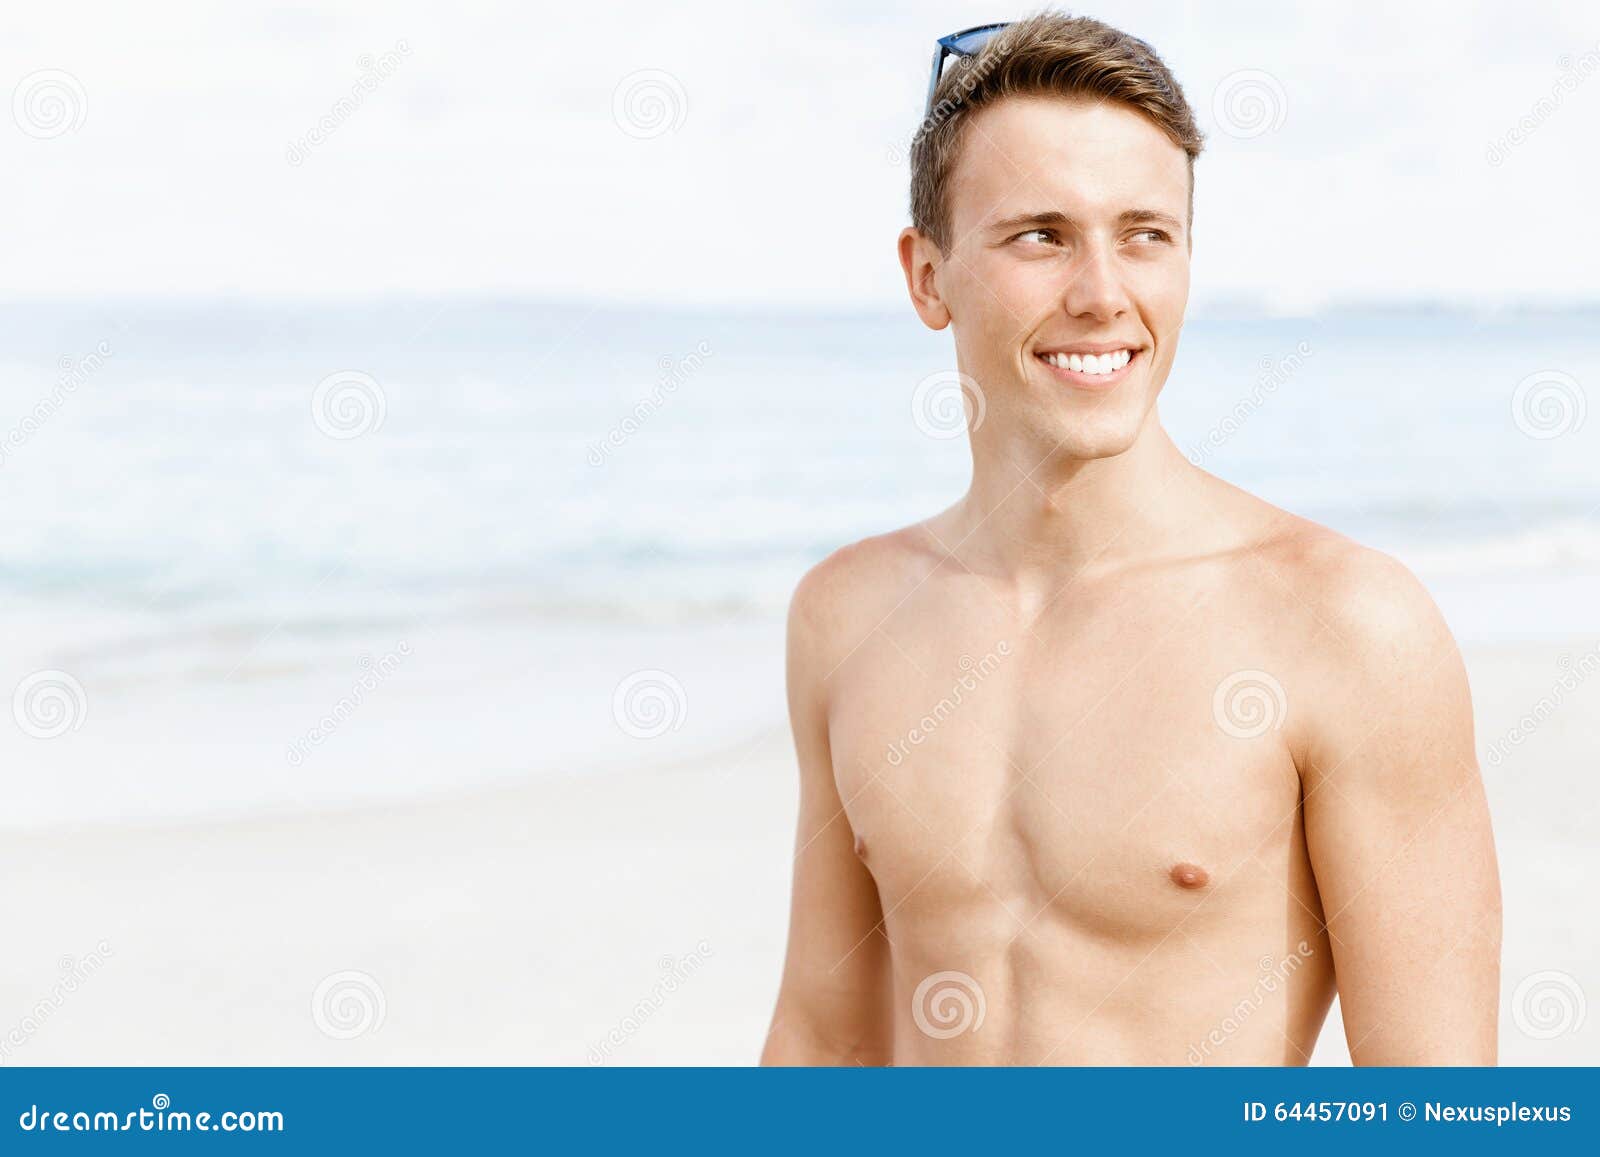 Handsome Man Posing at Beach Stock Image - Image of ocean, male: 64457091